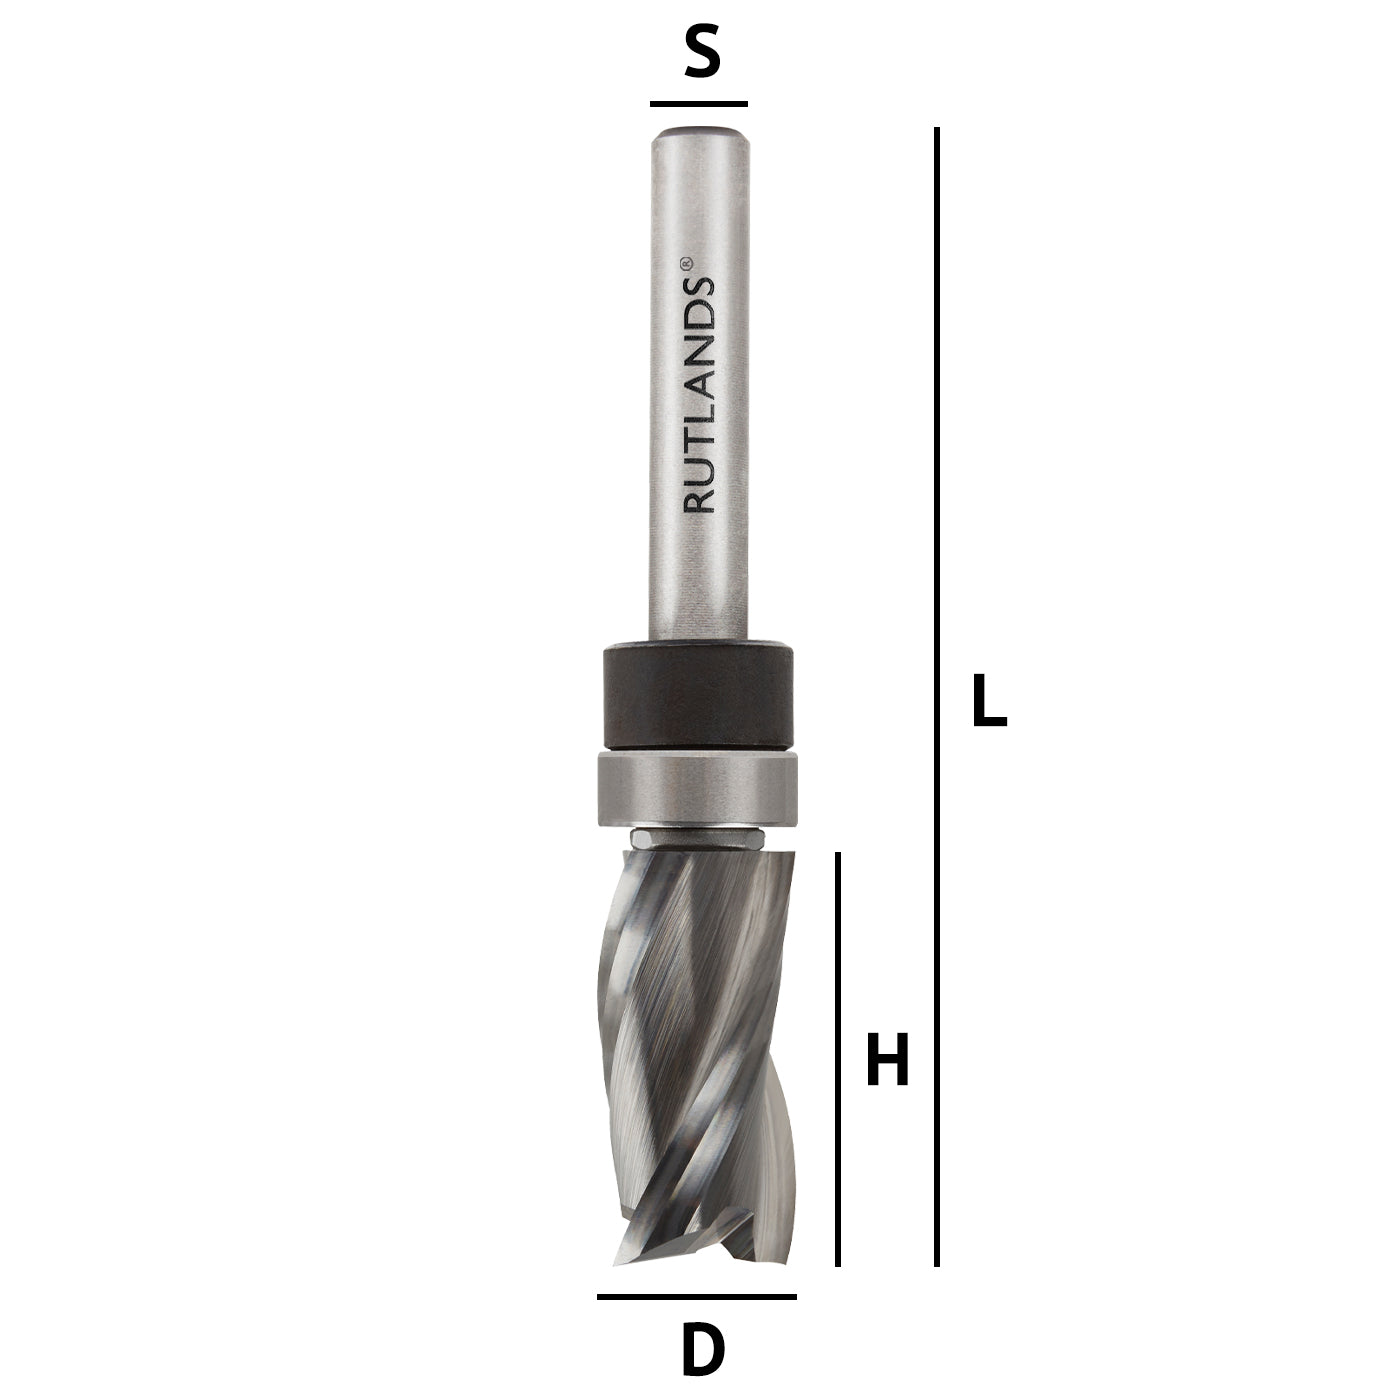 Solid Carbide Router Bit - Spiral Up Cut 2 Flute with Top Bearing -  D=12.7mm H=25mm L=72mm S=1/4